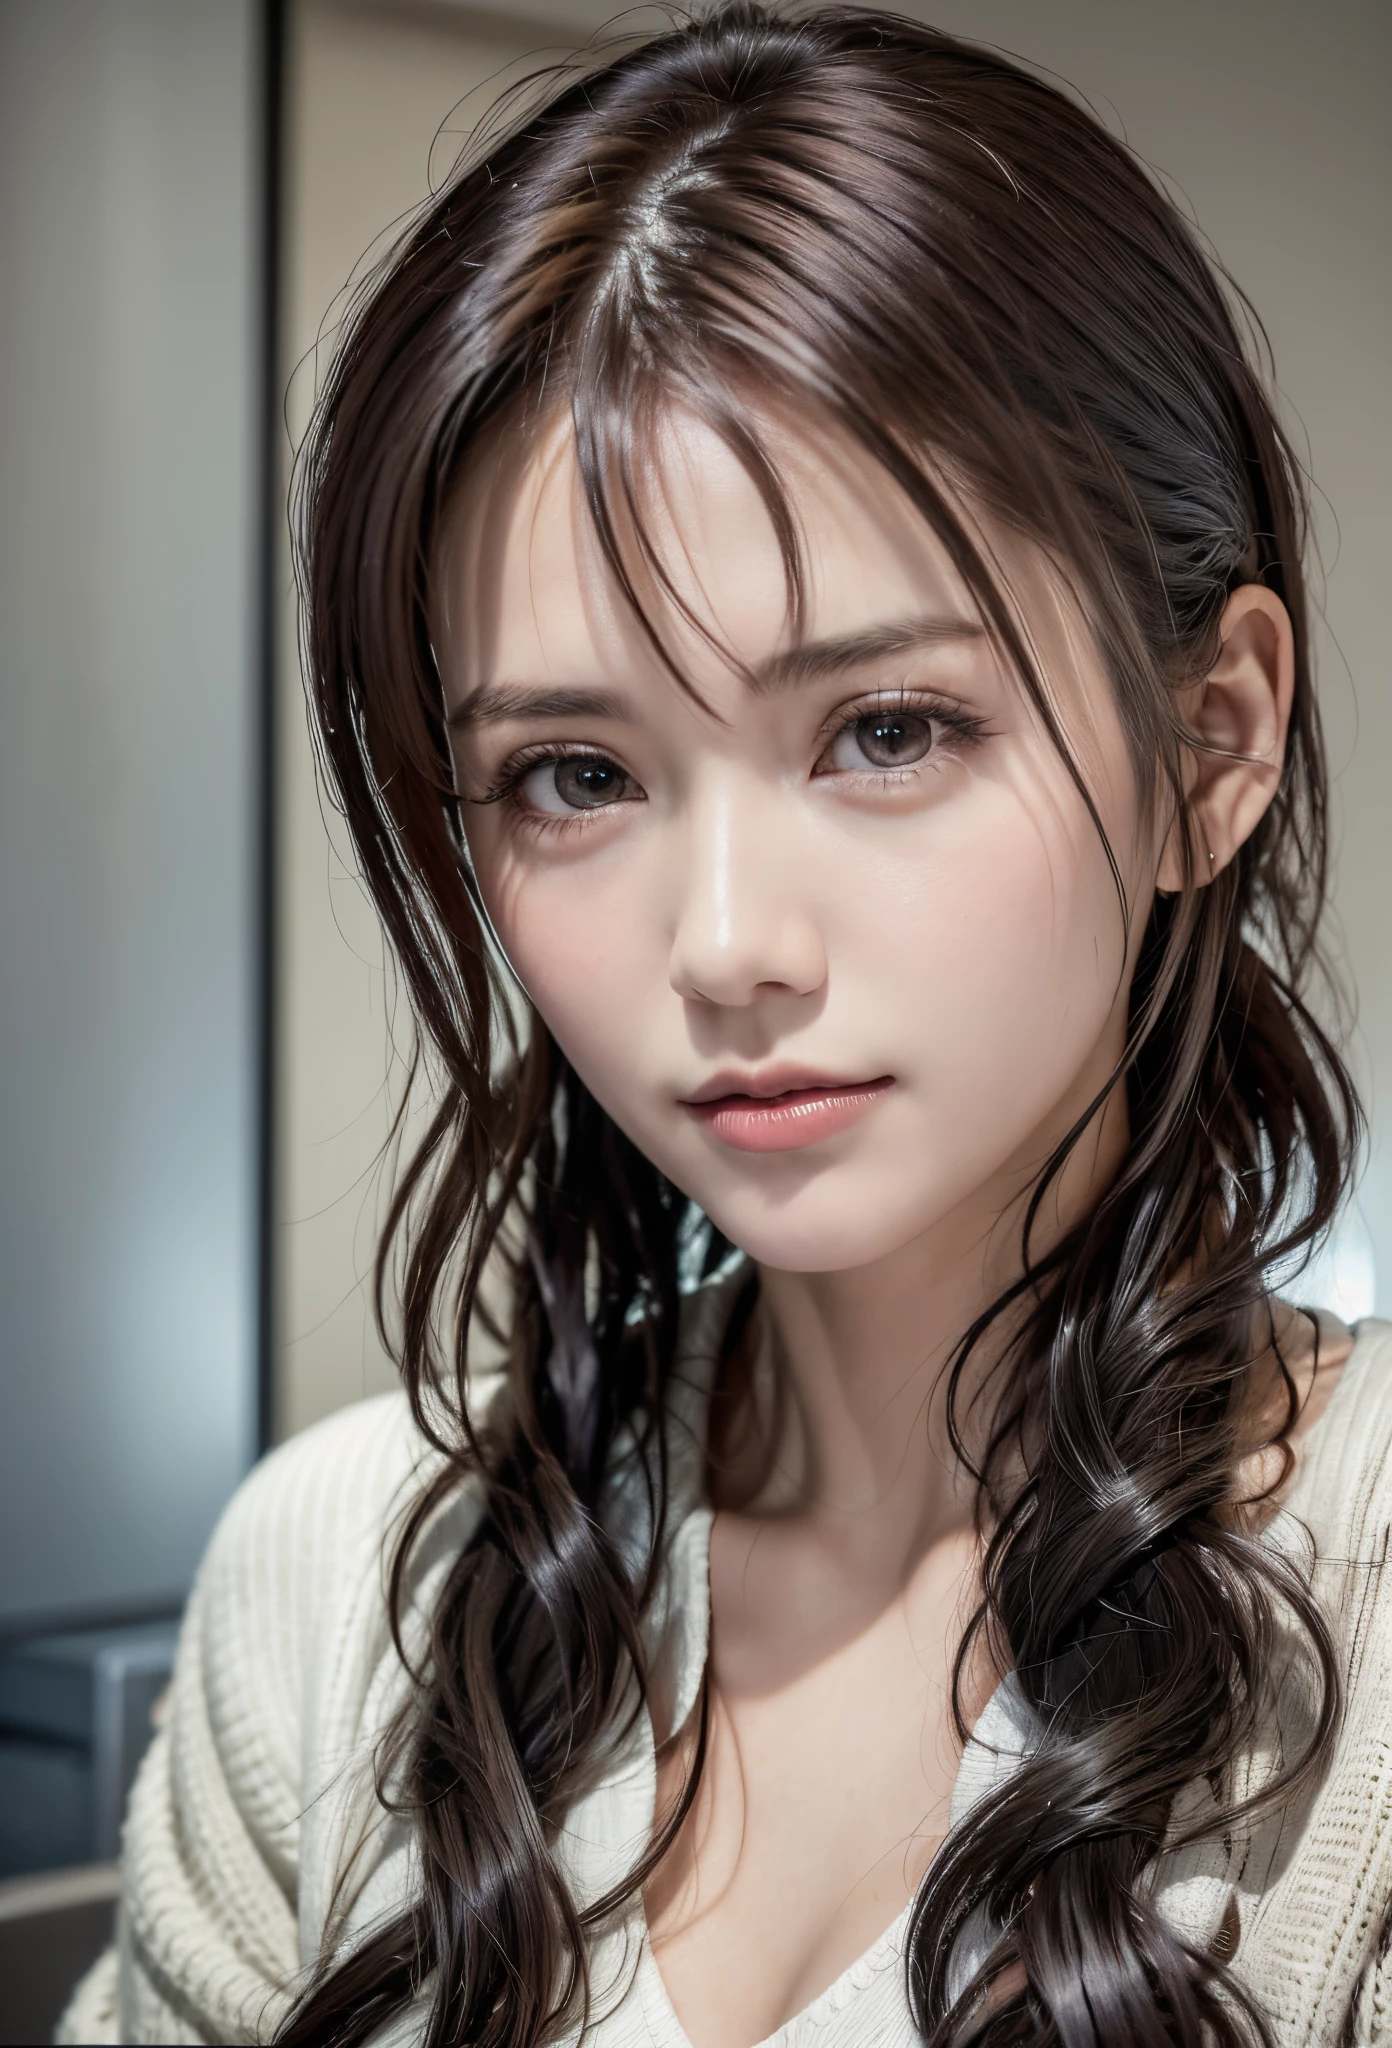 8K, of the highest quality, masutepiece:1.2), (Realistic, Photorealsitic:1.37), of the highest quality, masutepiece, Beautiful young woman, Pensive expression,、A charming、and an inviting look, Oversized knitwear、Hair tied back, Cinematic background, Light skin tone、Ko Shibasaki